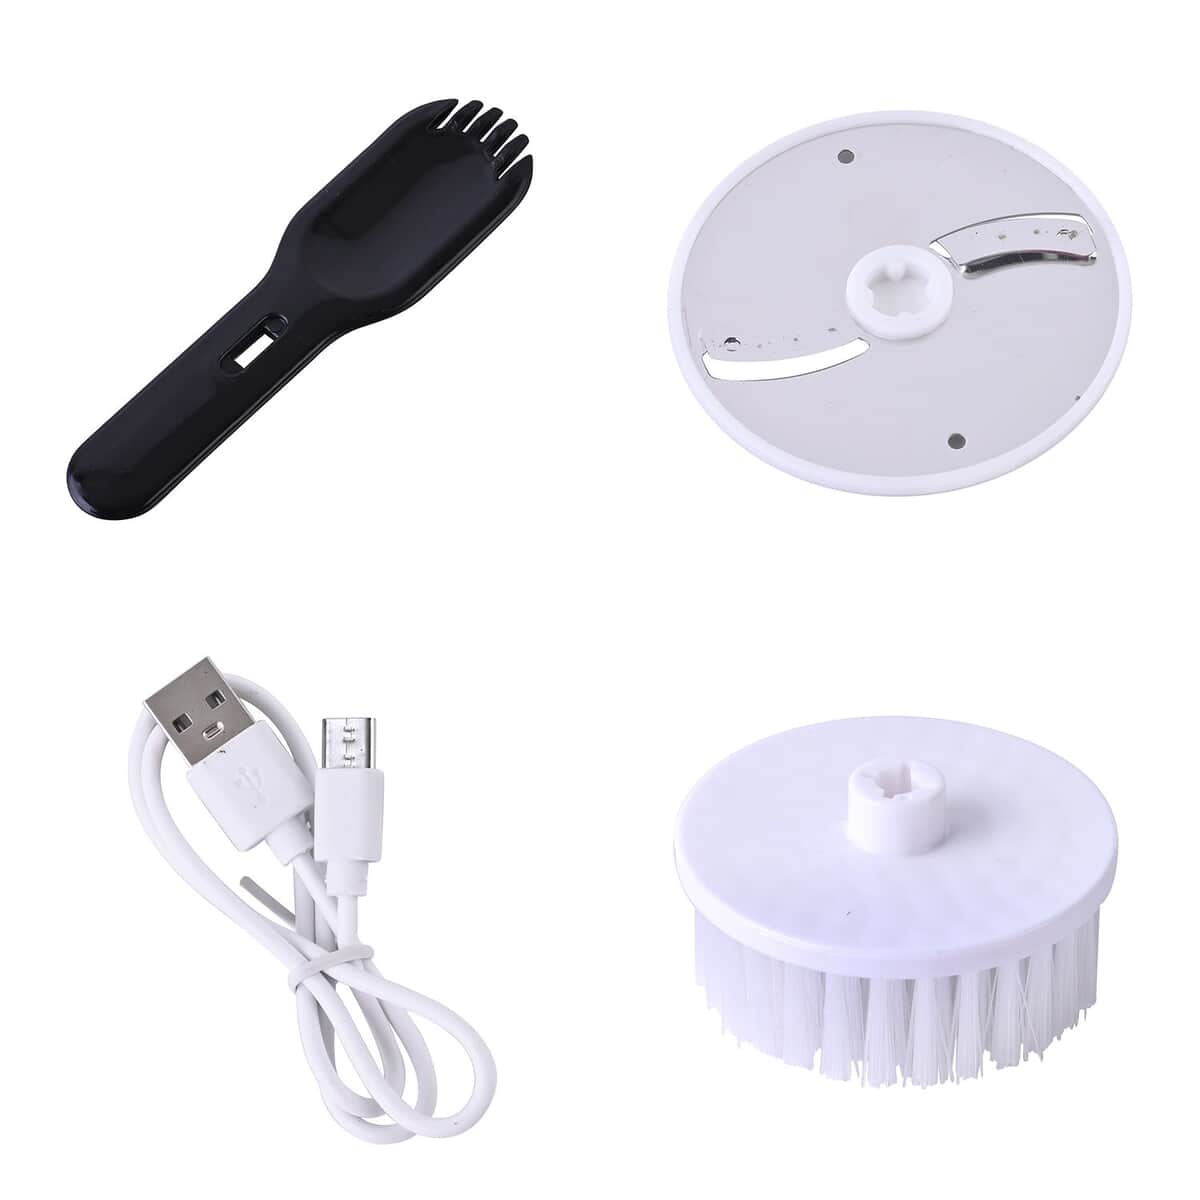 Buy 4-in-1 Handheld Rechargeable Food Chopper with USB Cable (Battery  Capacity 1500mAh) at ShopLC.